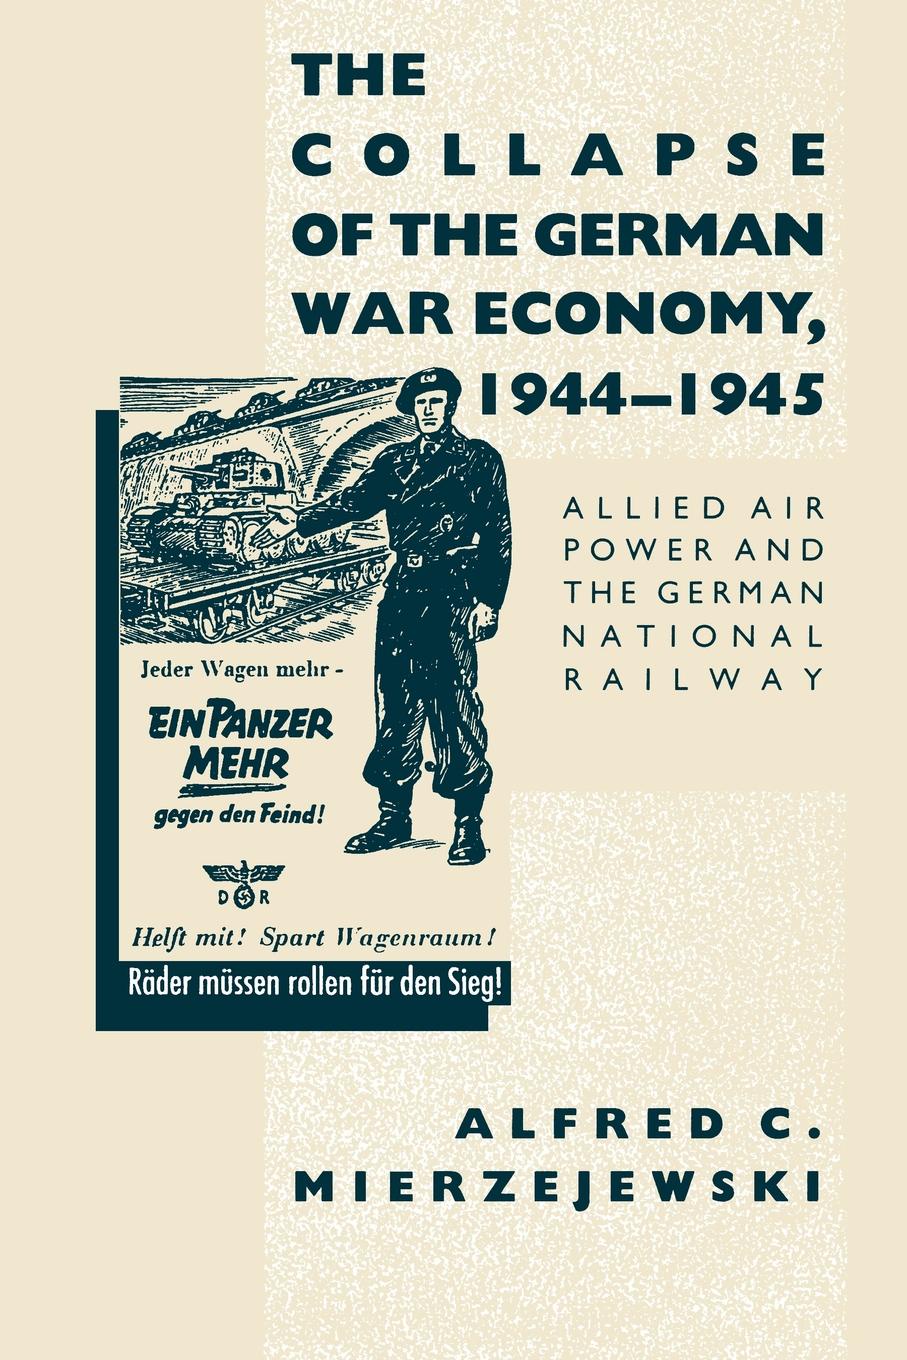 The Collapse of the German War Economy, 1944-1945. Allied Air Power and the German National Railway